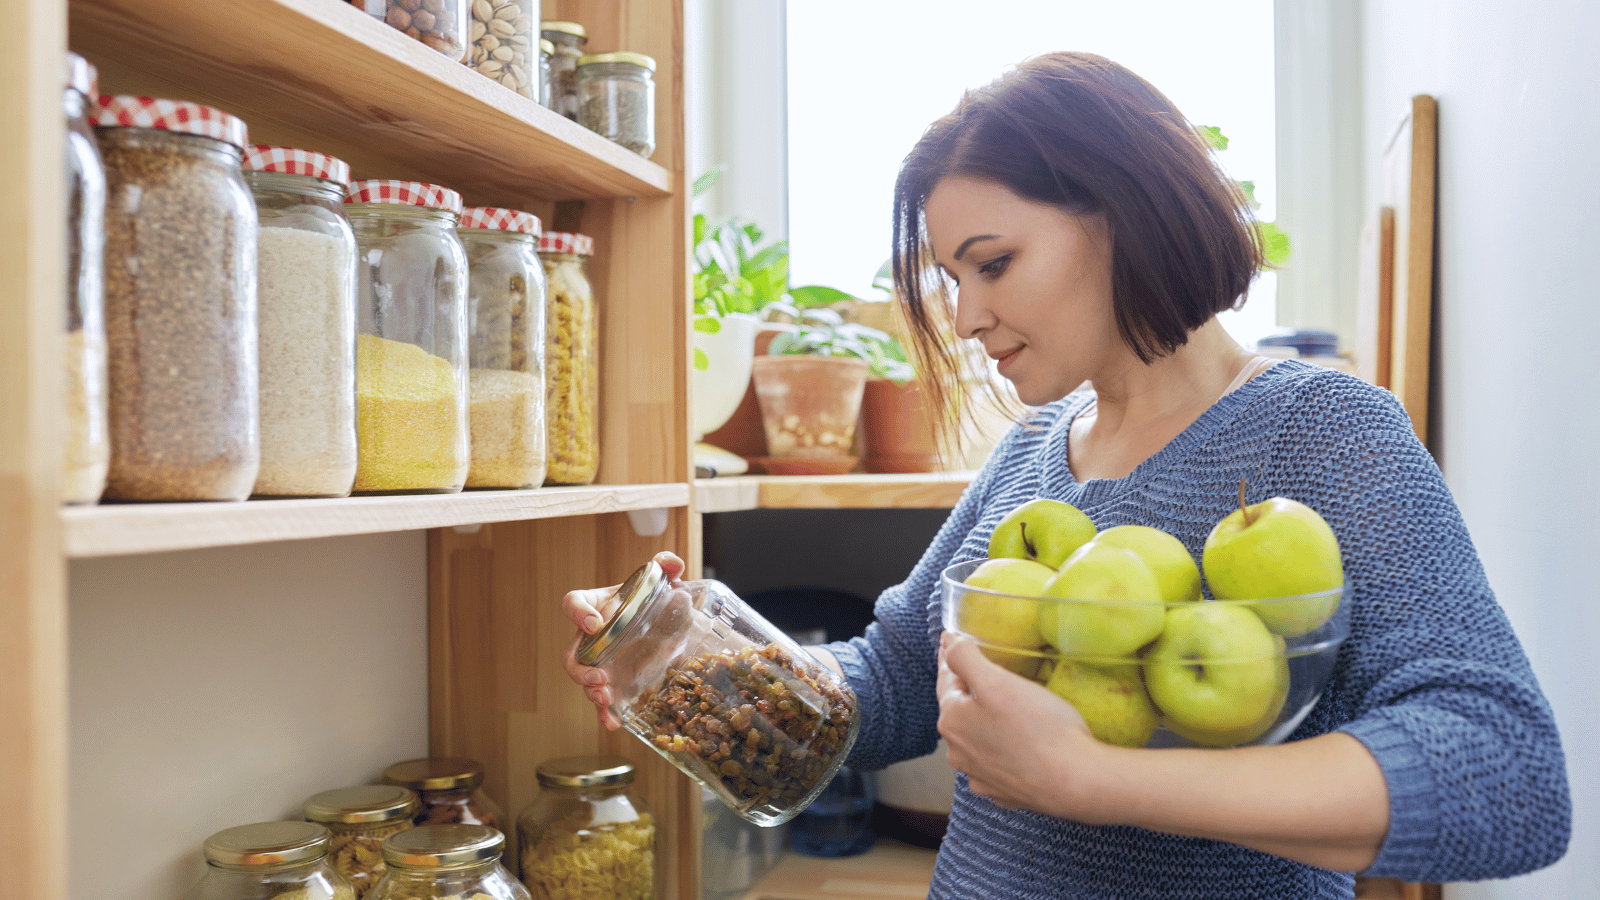 Pantry Organization: 6 Steps to a Clutter-Free Kitchen